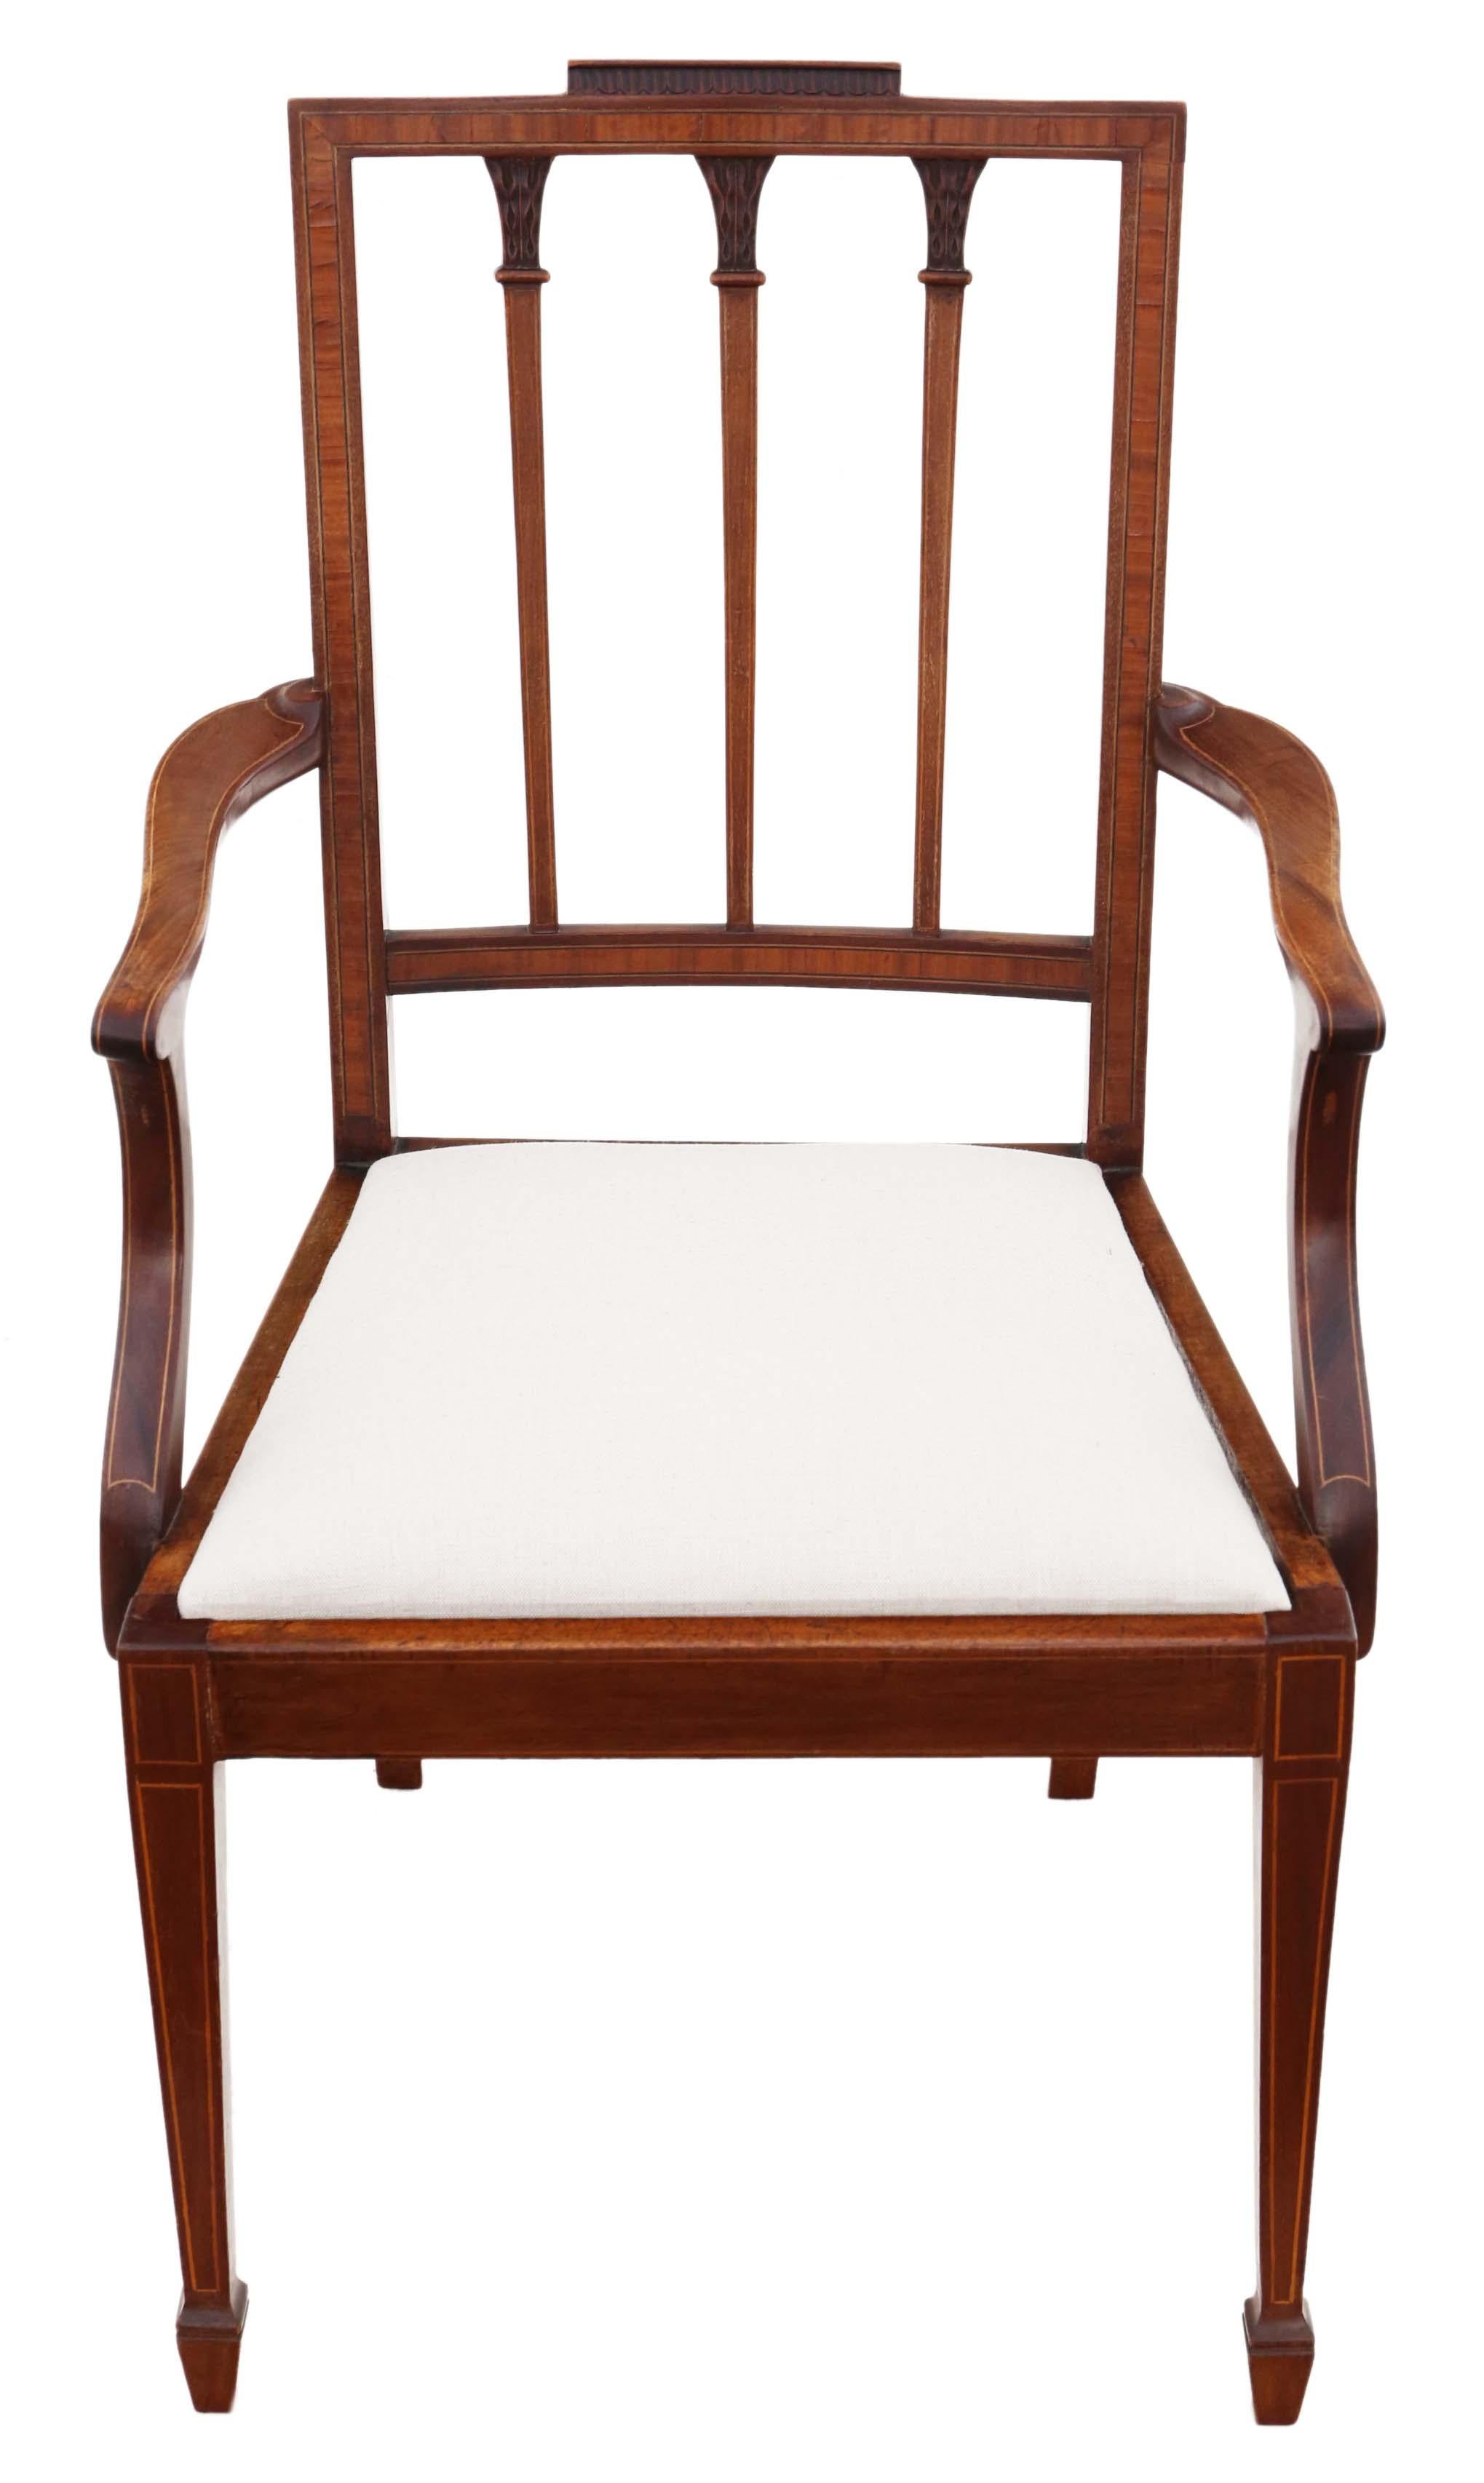 Georgian Revival Mahogany Dining Chairs: Set of 8 (6 + 2), Antique Quality, C190 In Good Condition For Sale In Wisbech, Cambridgeshire